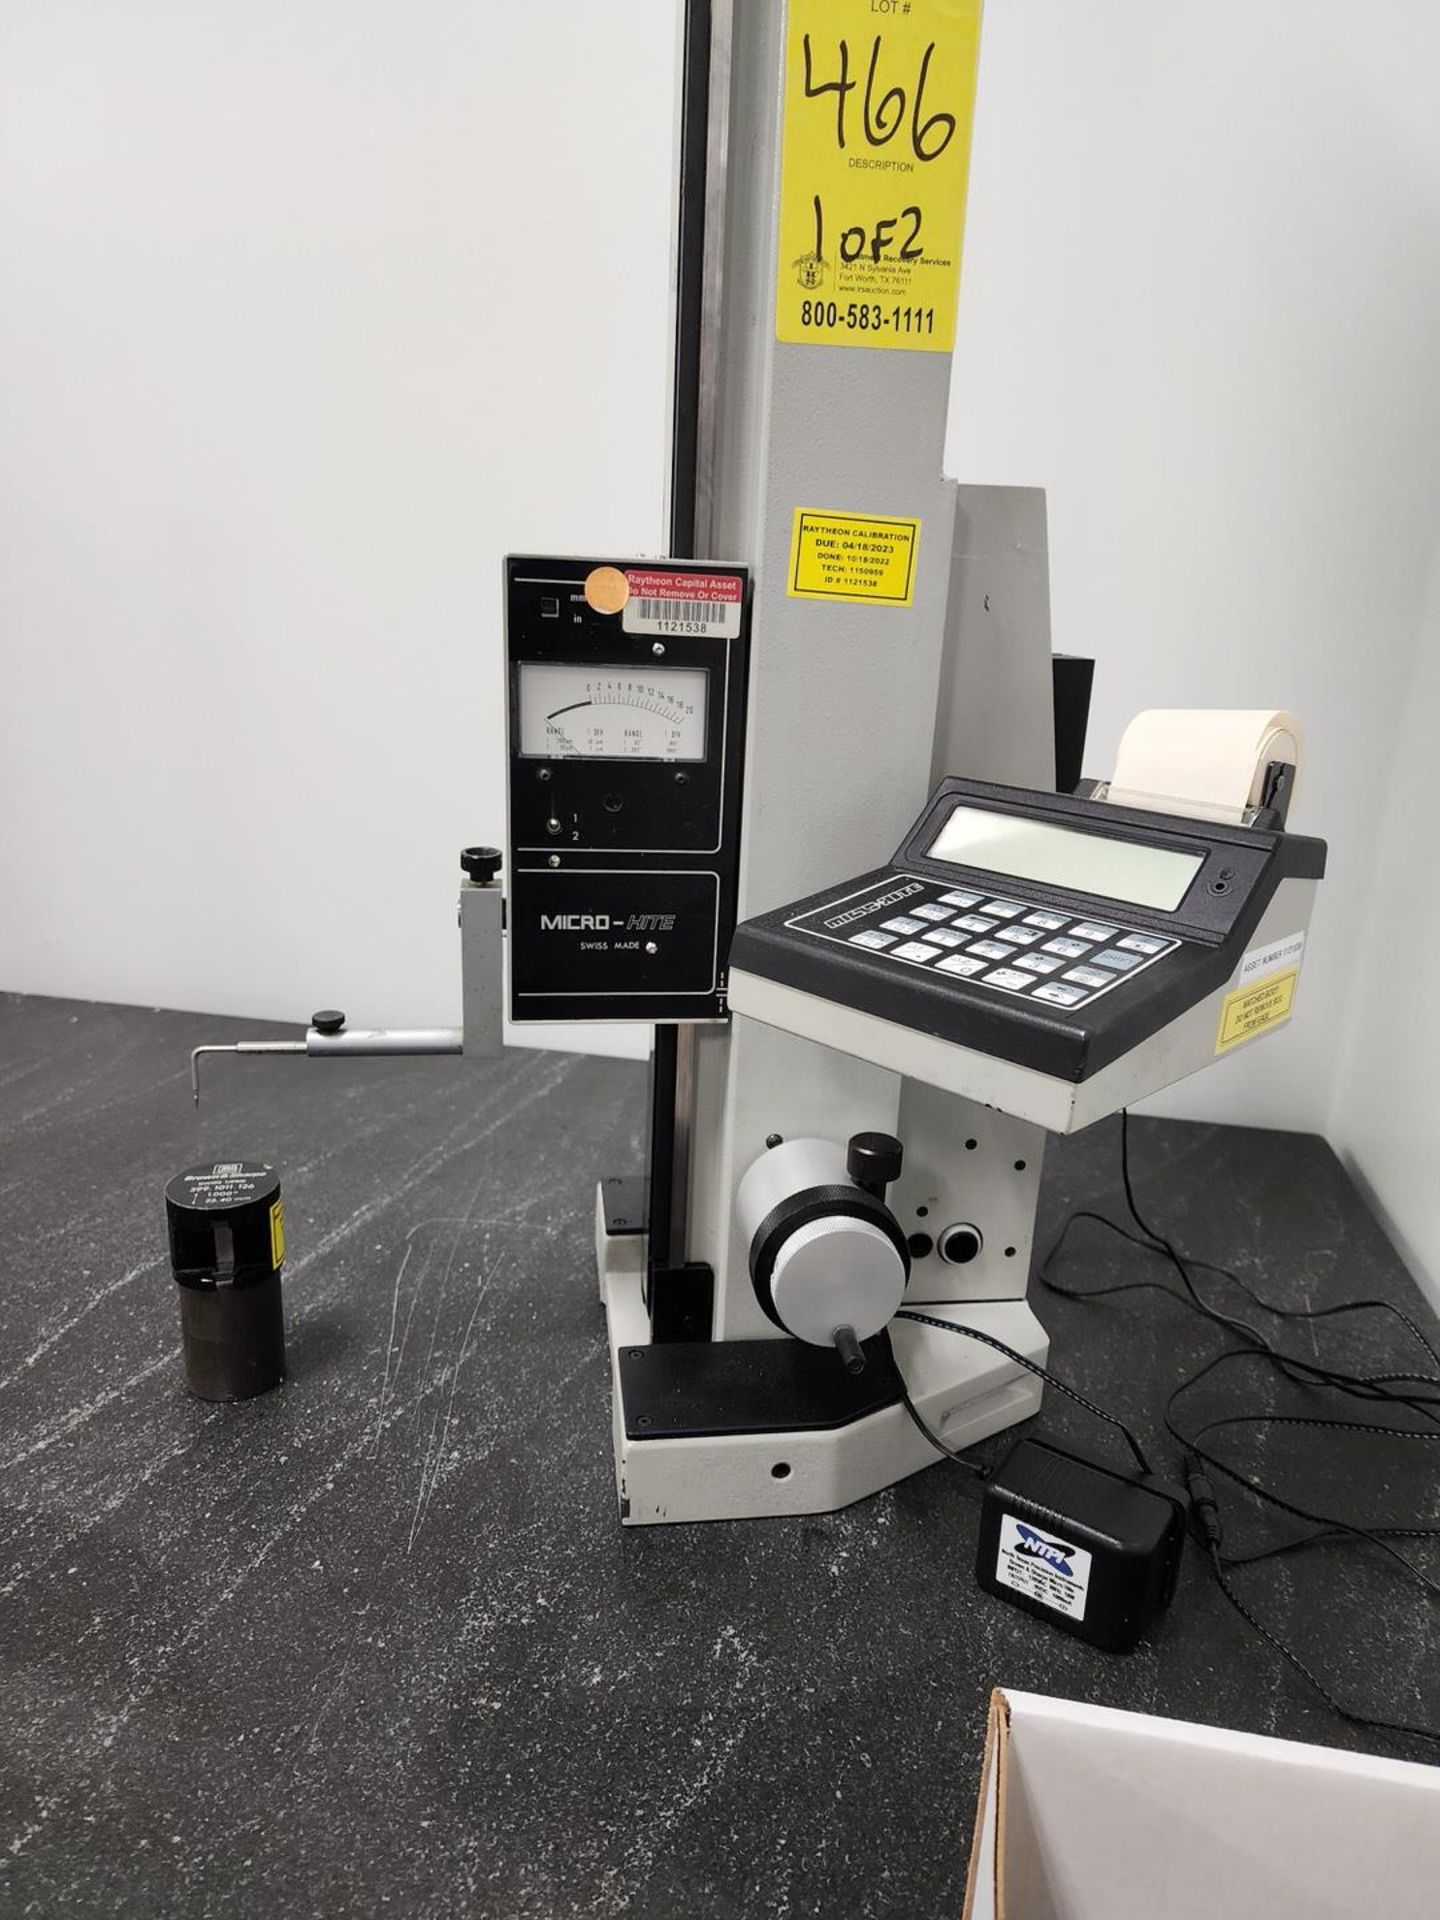 B&S Micro-hite Height Gage W/ Tooling - Image 5 of 7